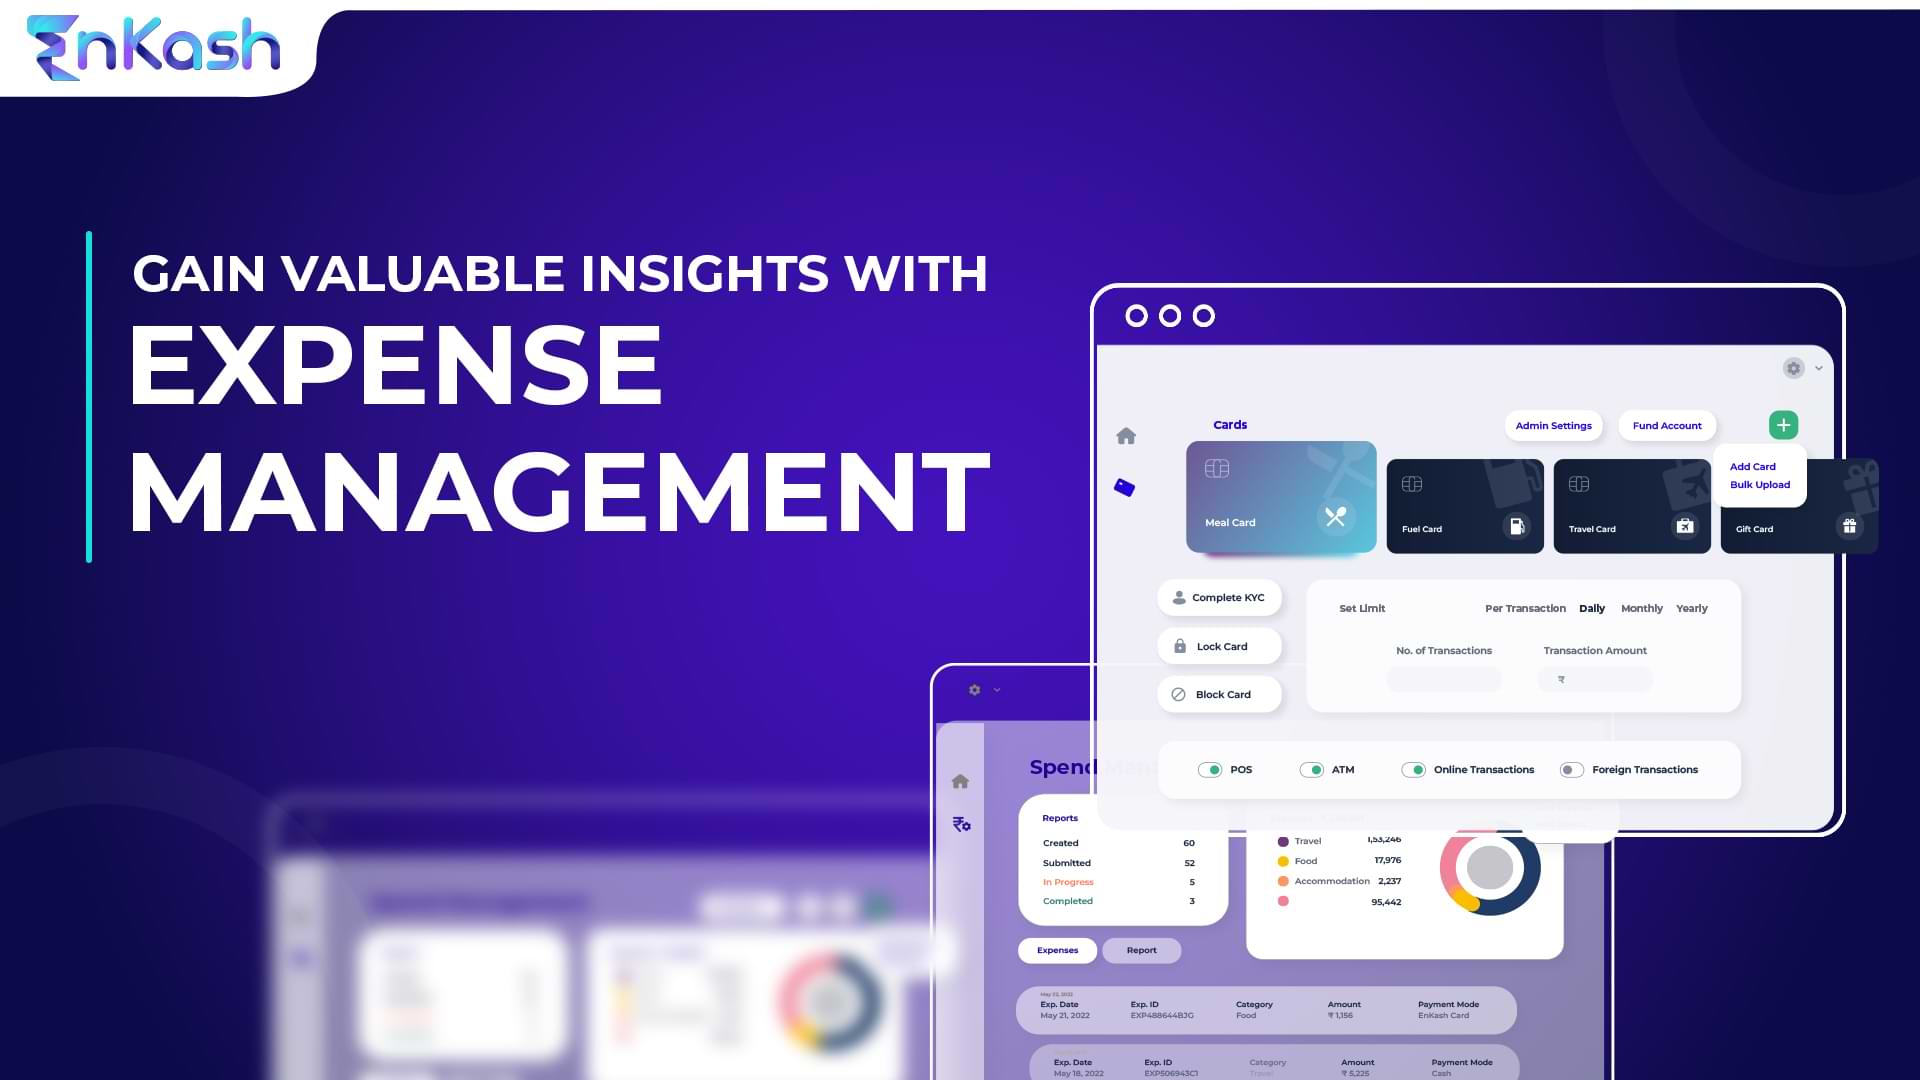 Insights with expense management